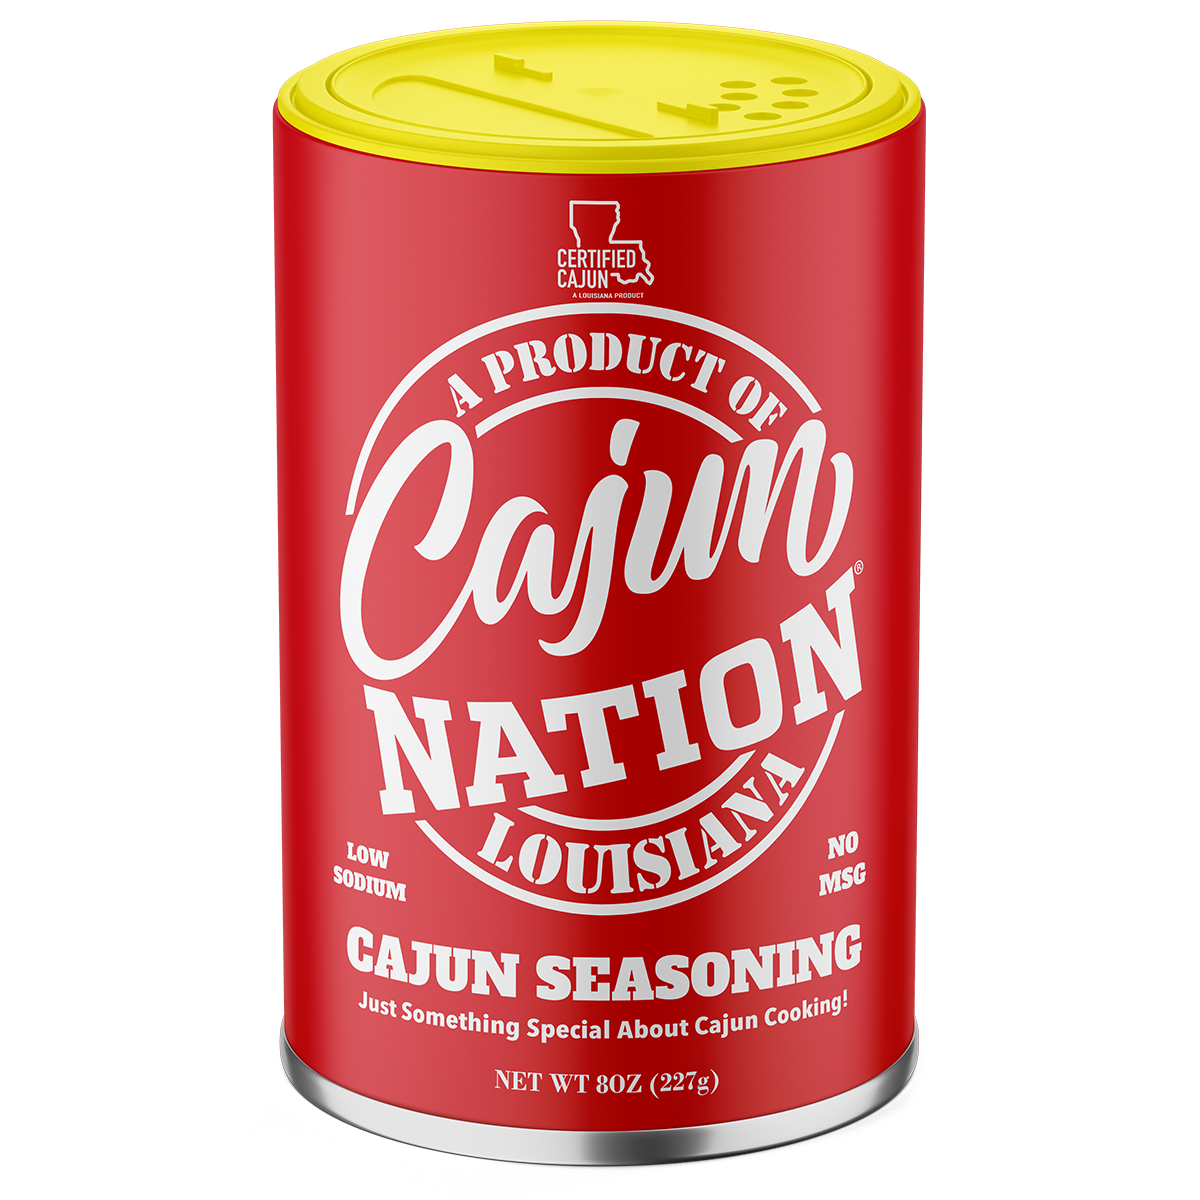 GEAUX GET THE RED CAN - Cajun Nation Cajun Seasoning Low Sodium is a Certified Cajun 8oz flavorful LOW SODIUM (140mg) Cajun Seasoning blend of Cajun Spices with No MSG and GLUTEN FREE, Great Flavor. Blended in Cajun Nation, Louisiana along the Cajun Coast.